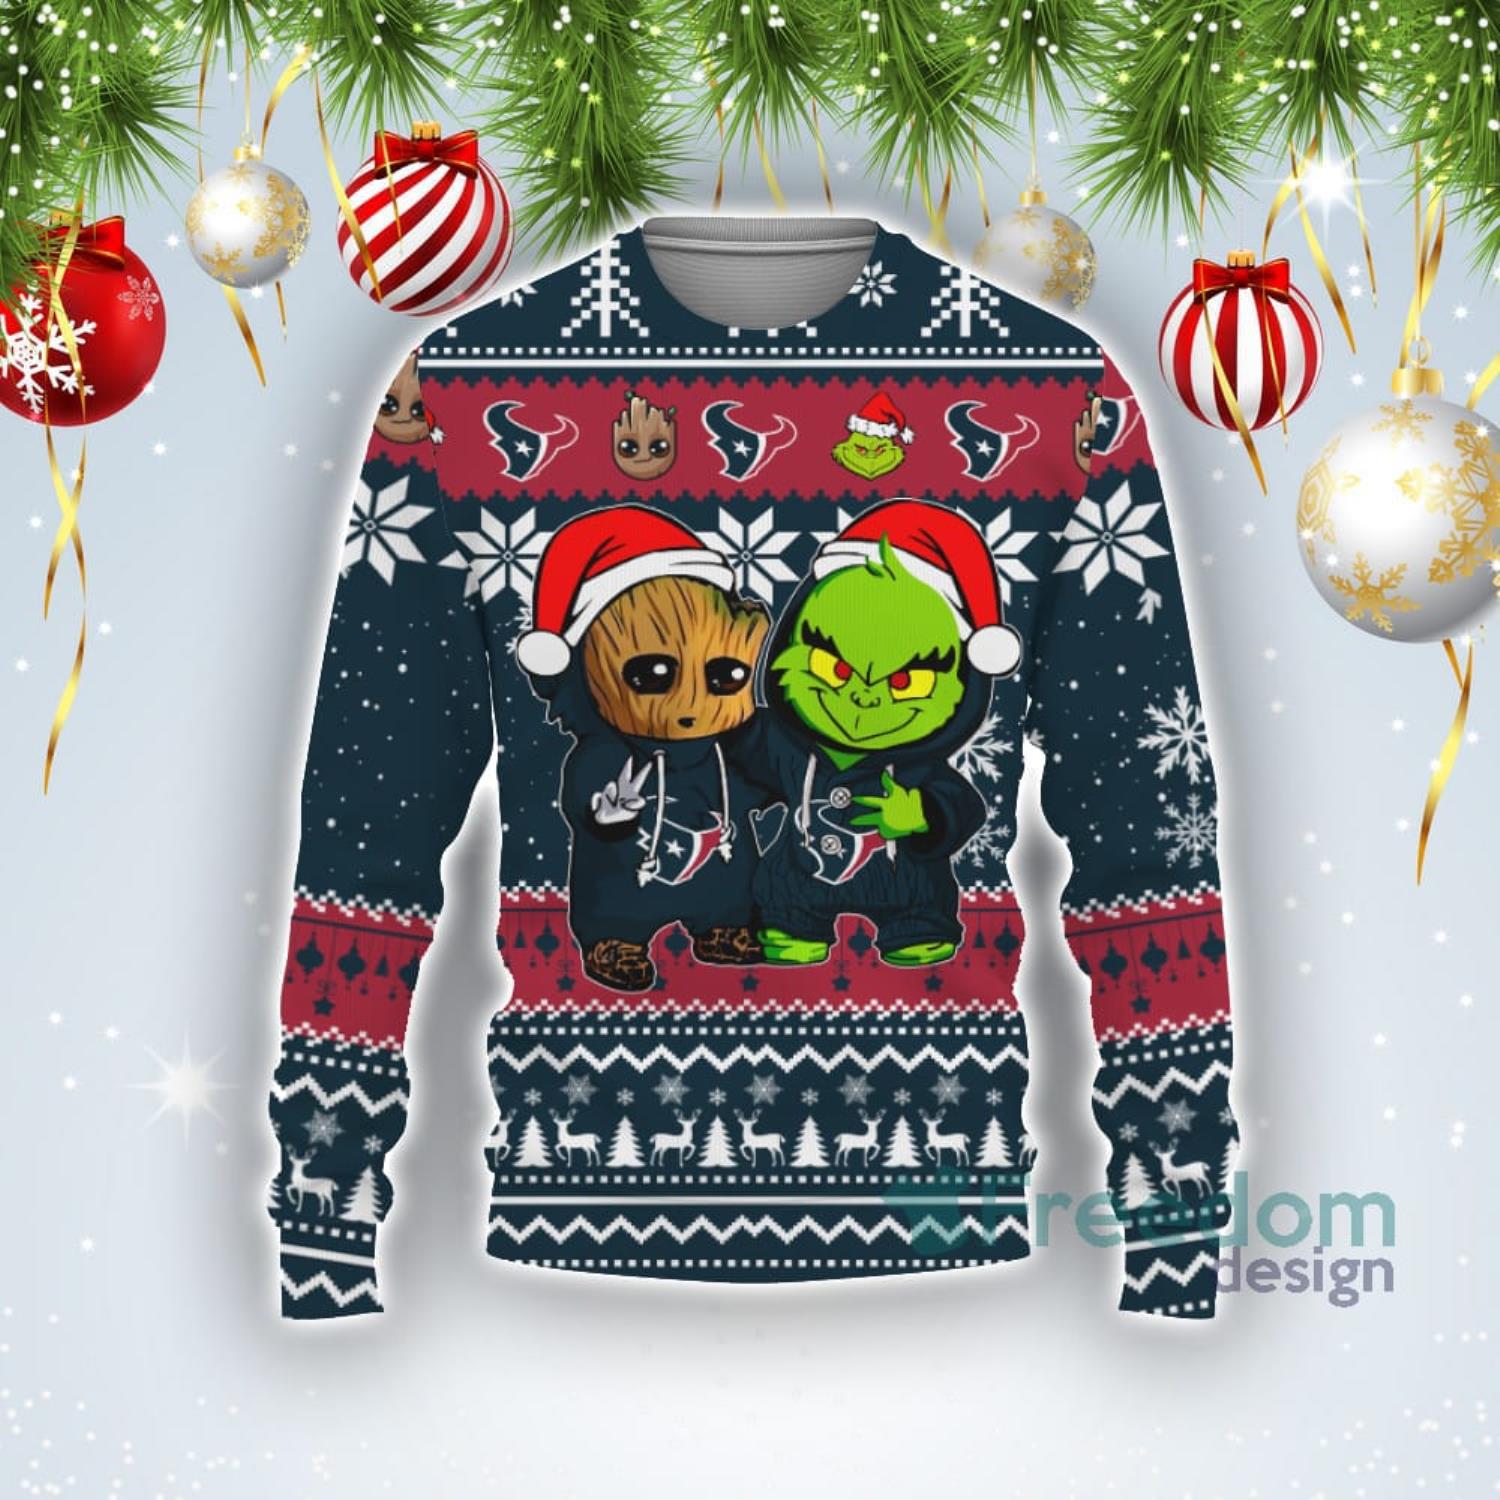 Houston Astros Cute Baby Yoda Star Wars 3D Ugly Christmas Sweater Unisex  Men and Women Christmas Gift - Banantees